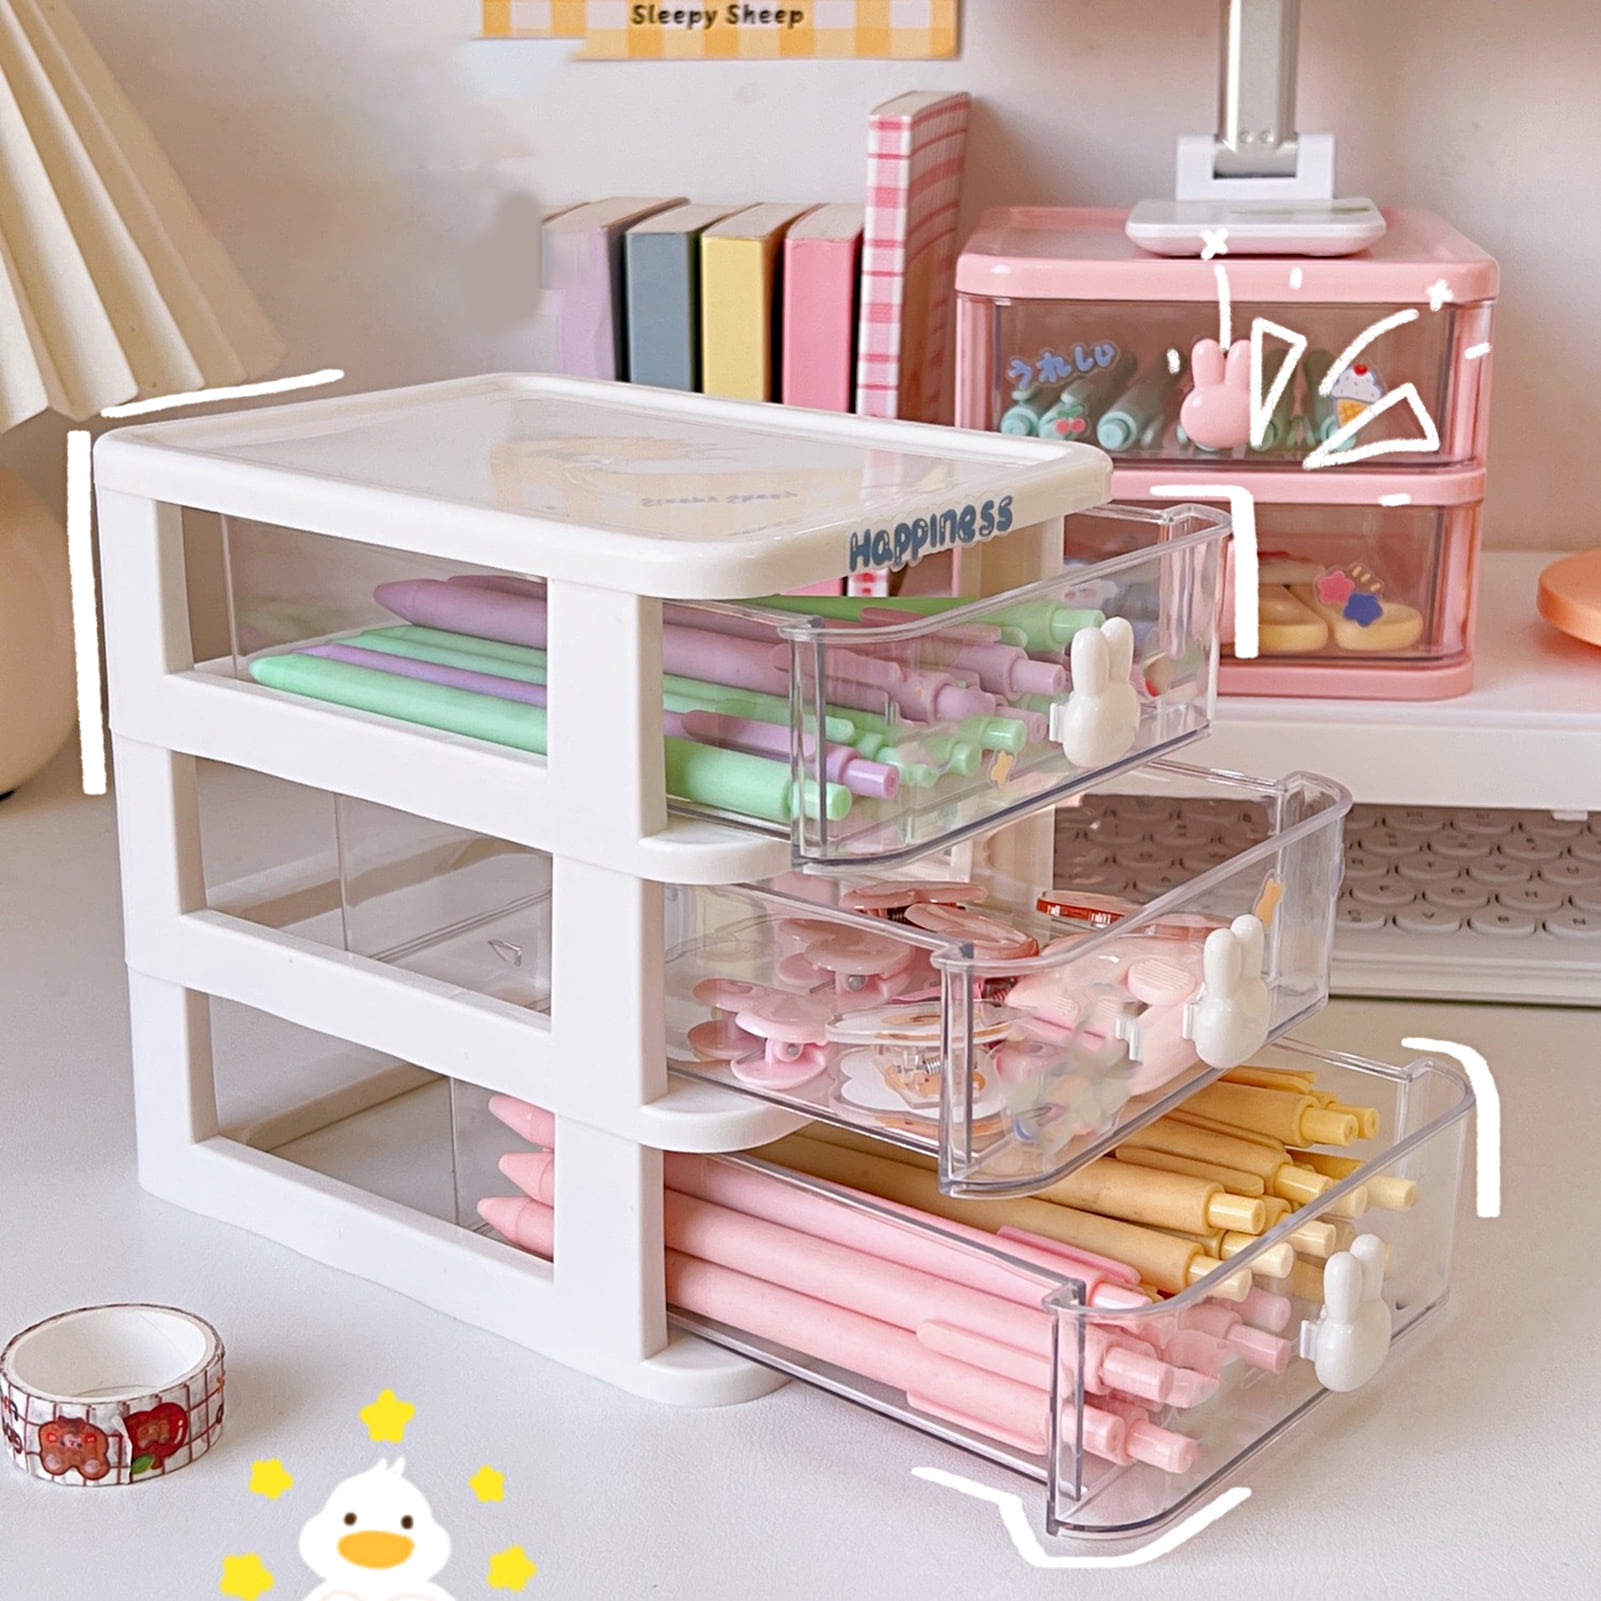 Details about   Storage Tray Makeup Tidy For Kitchen Home Office Drawer Organizer Dresser New 